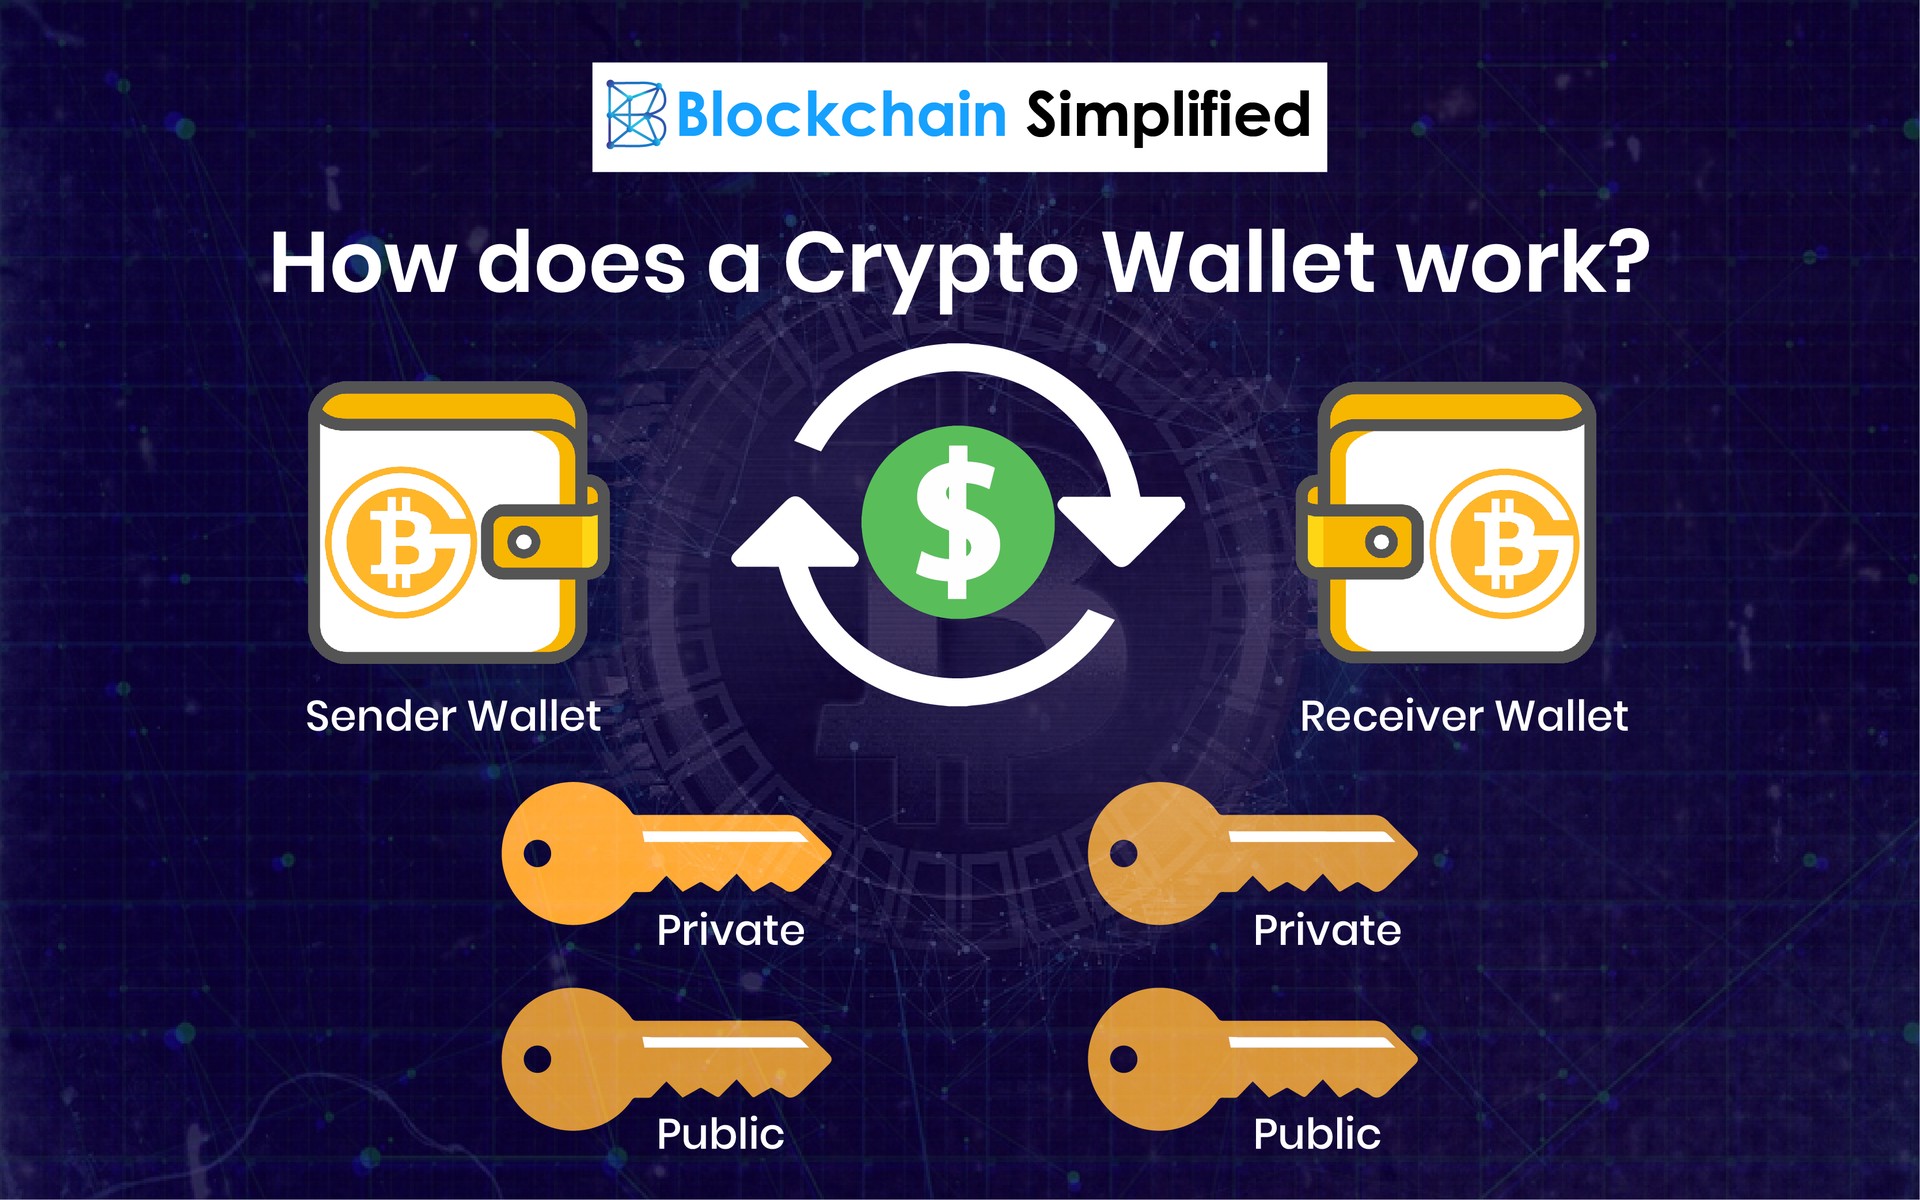 How do cryptocurrency wallets etheral movement